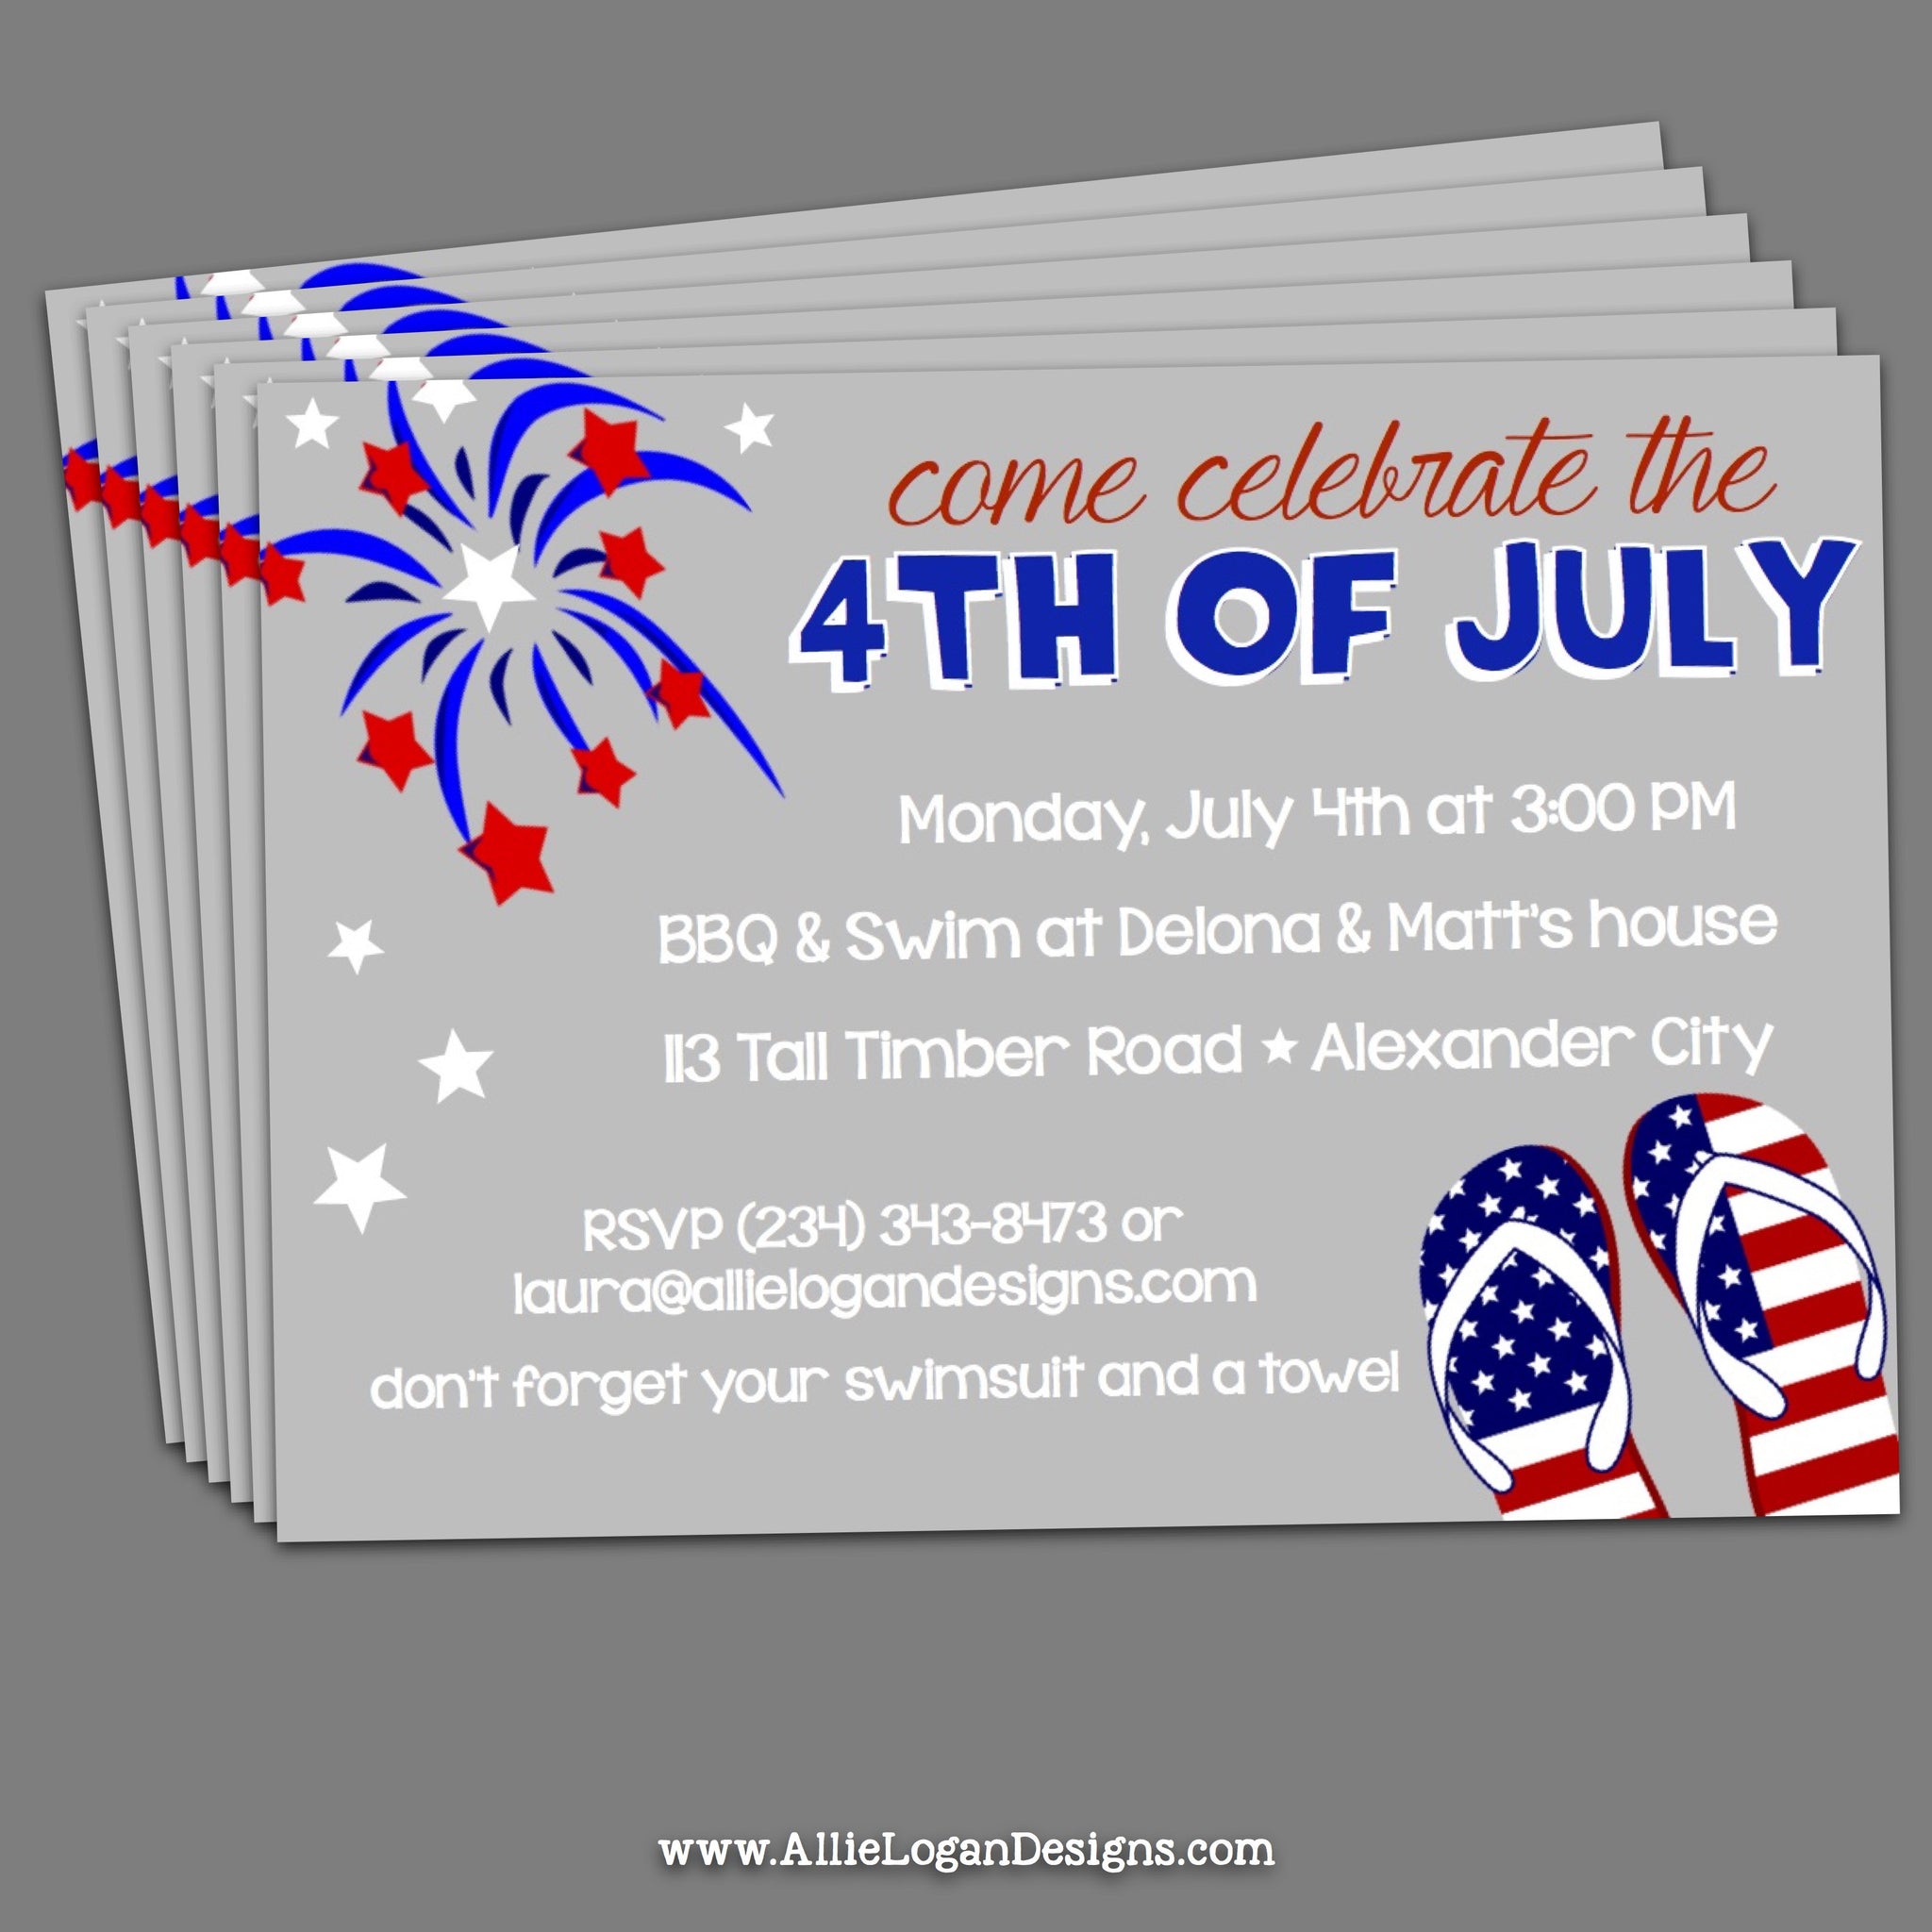 4th Of July Invitations - Party Time Fun